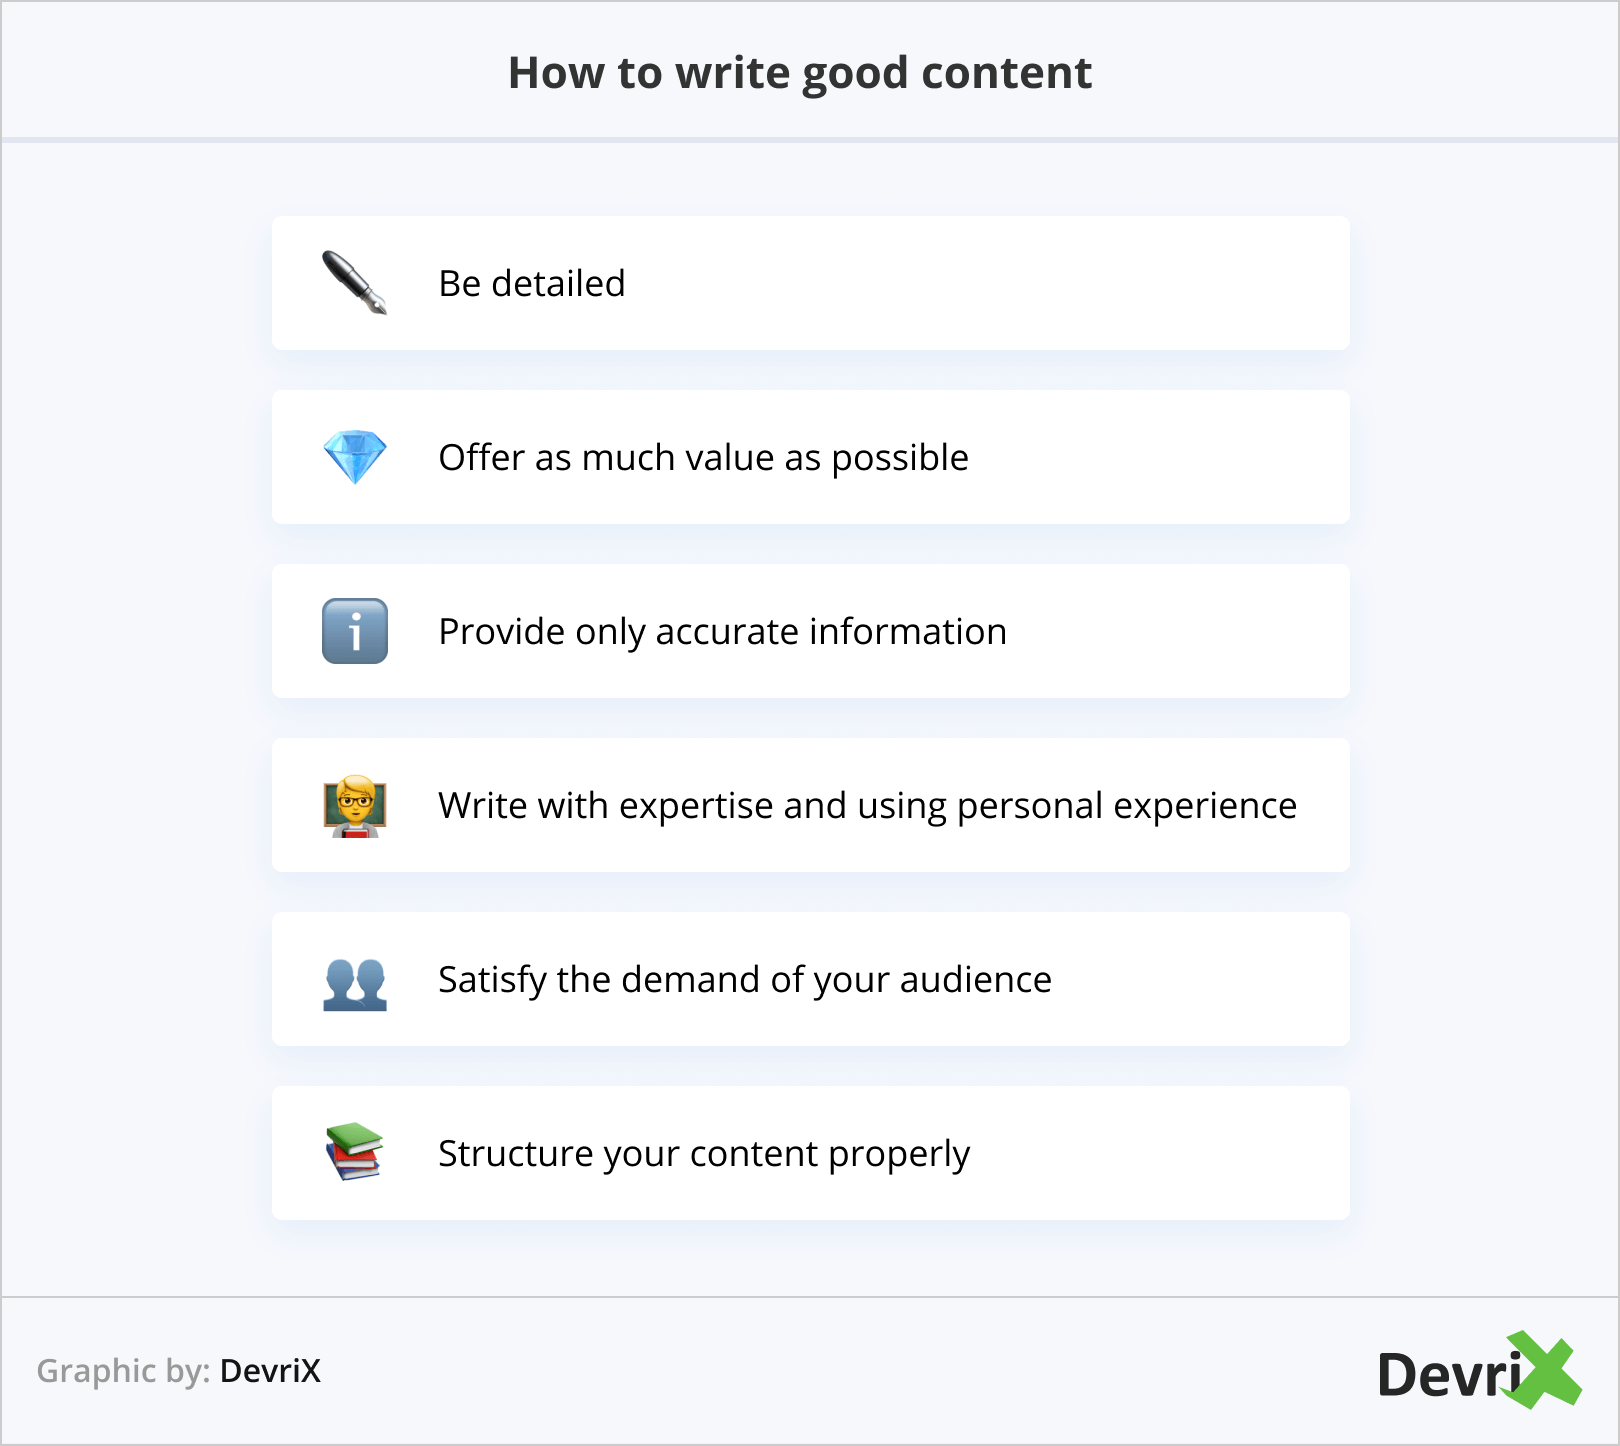 How to write good content